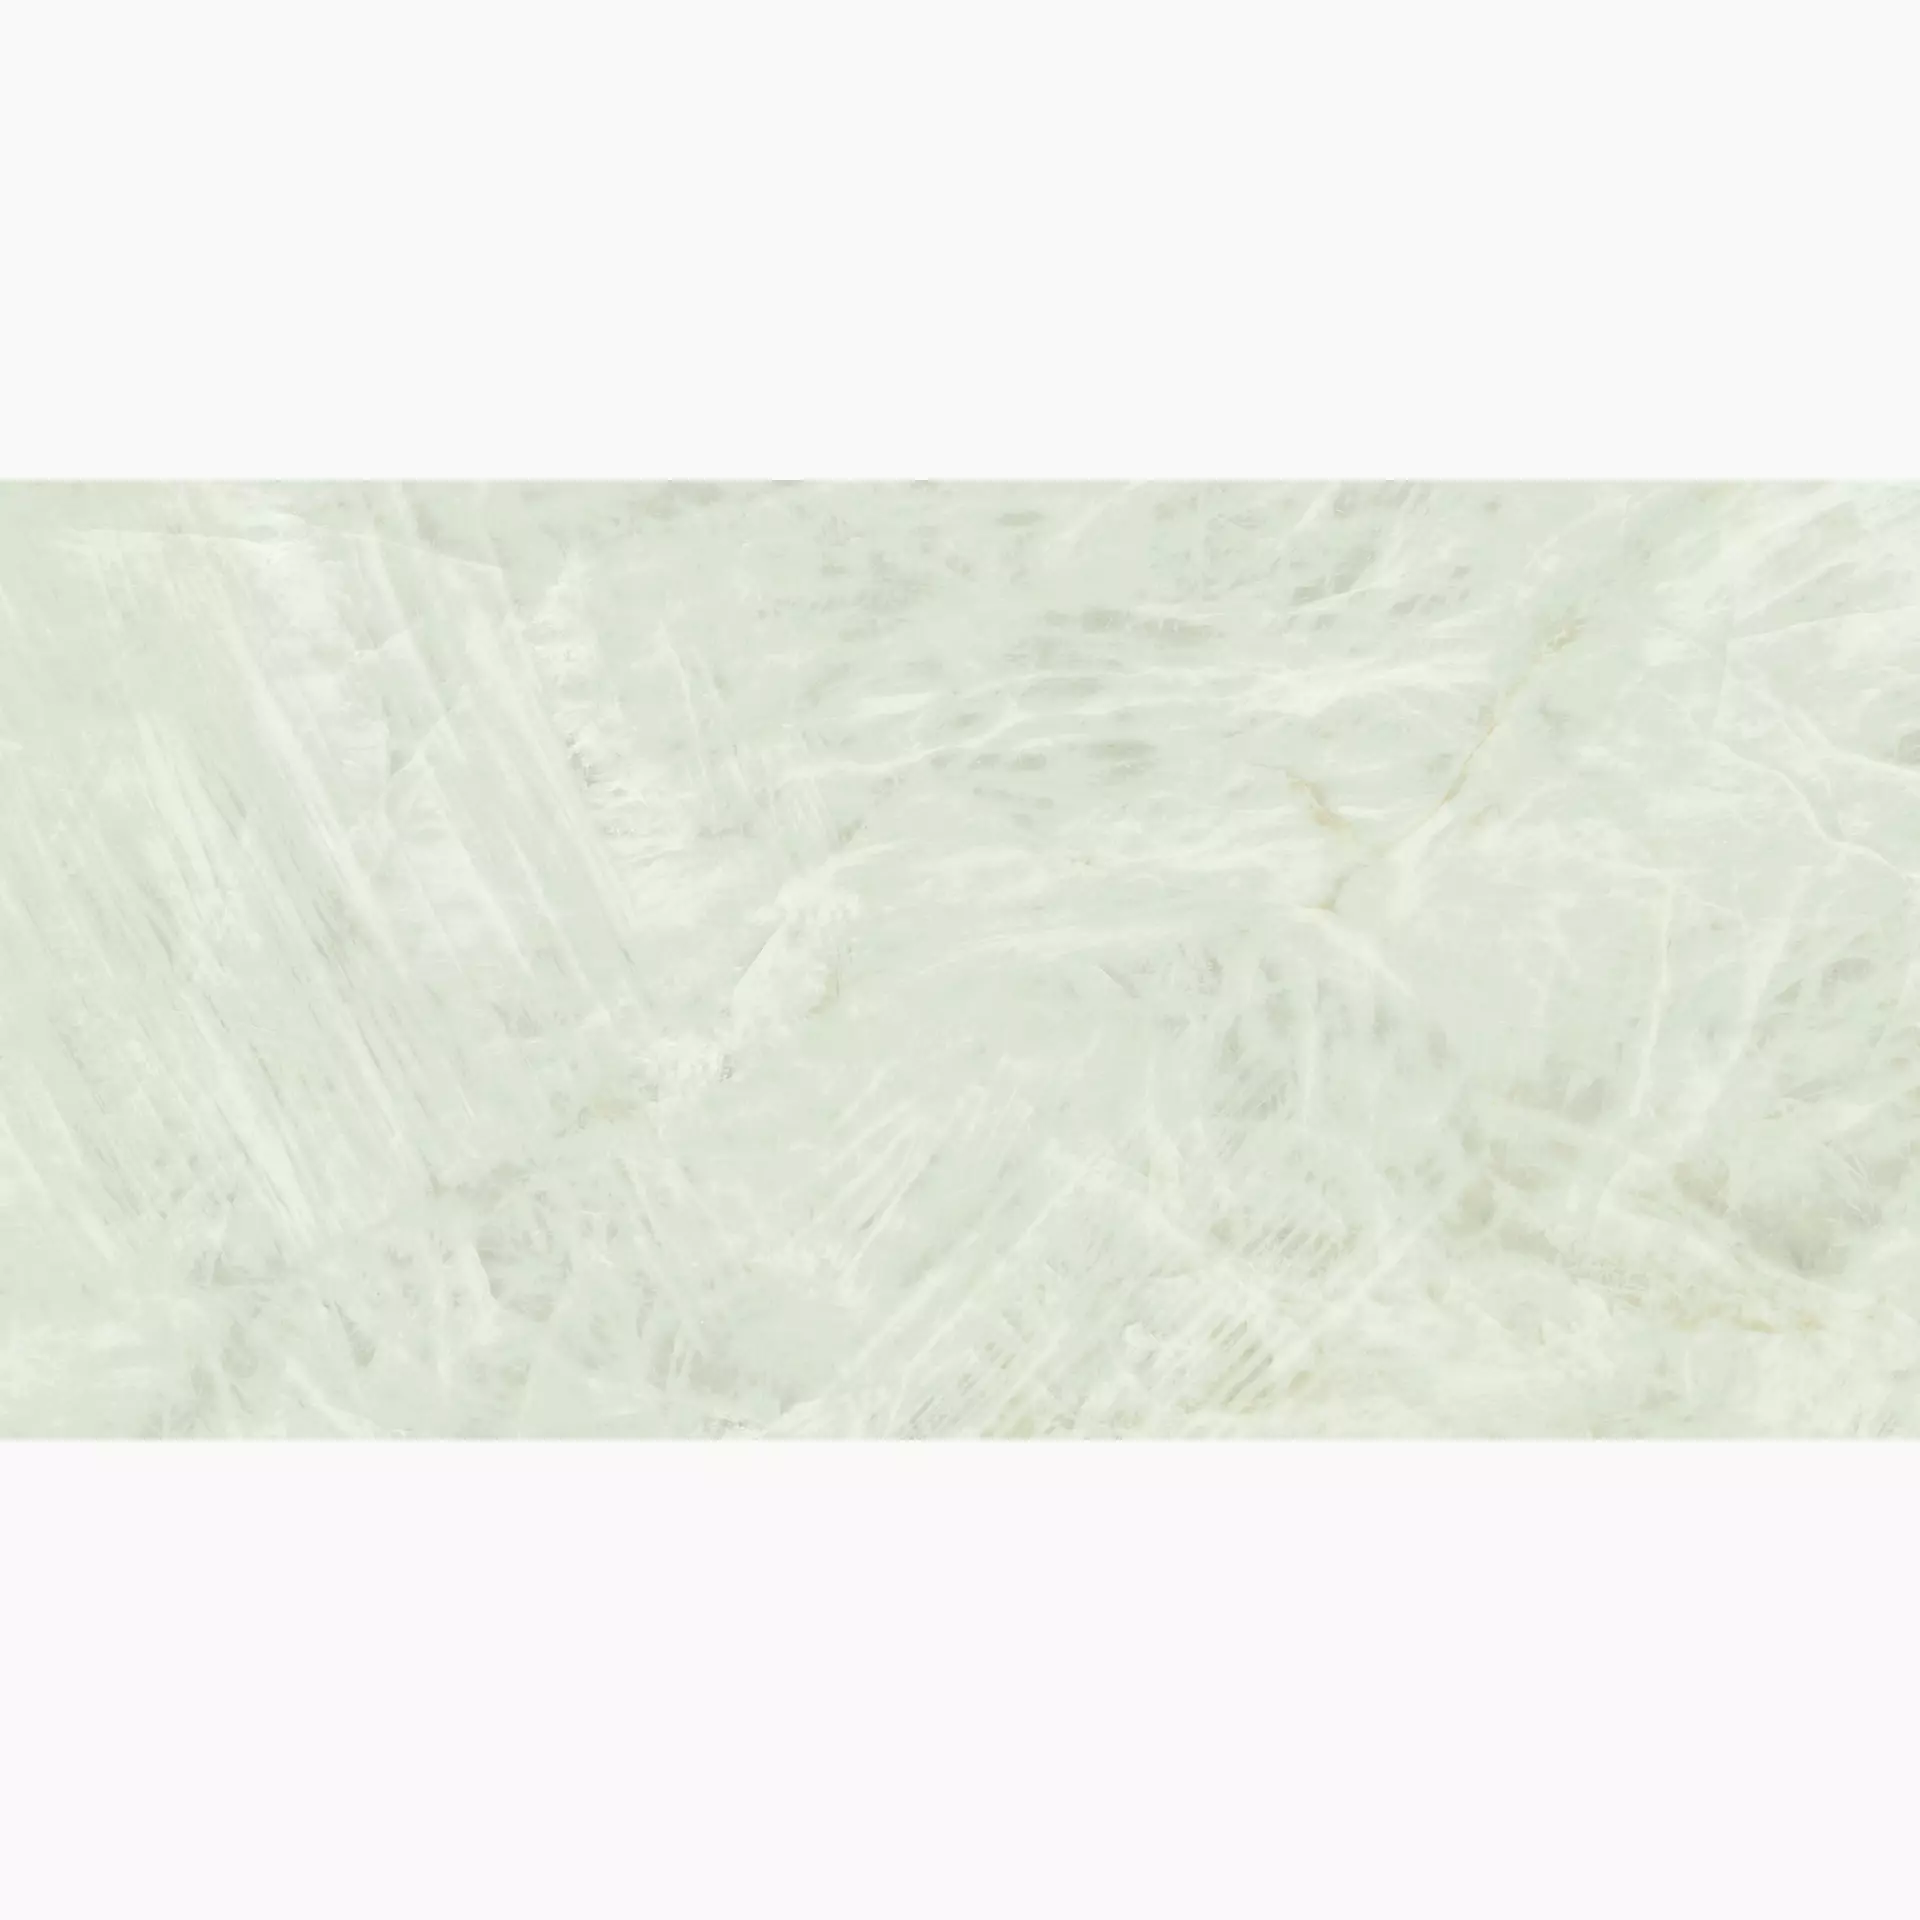 Atlasconcorde Marvel Gala Crystal White Lappato AFXR 60x120cm rectified 9mm